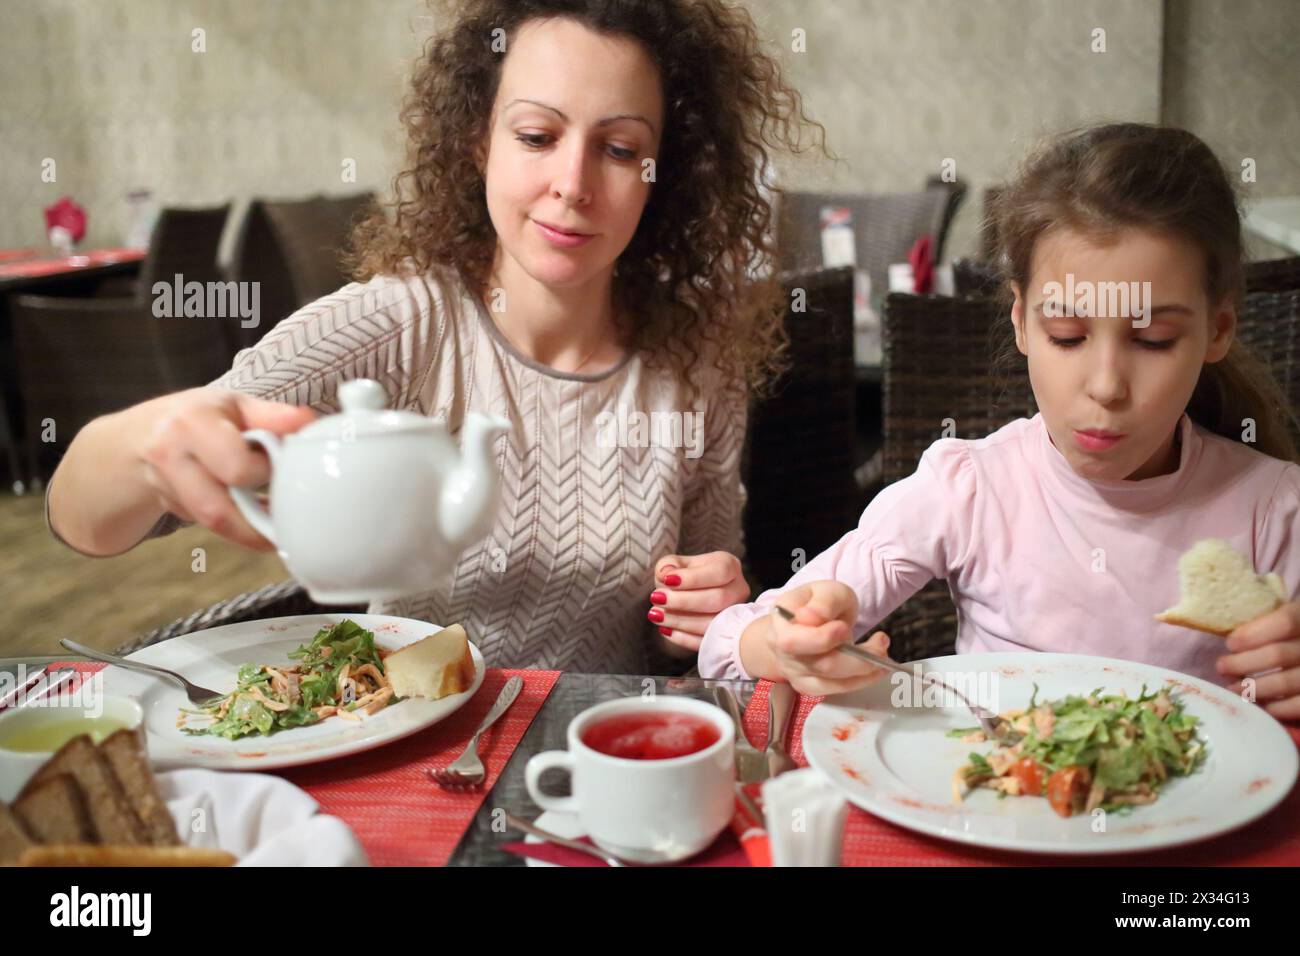 Mother and daughter eating salad and drinking tea at a table in a restaurant Stock Photo